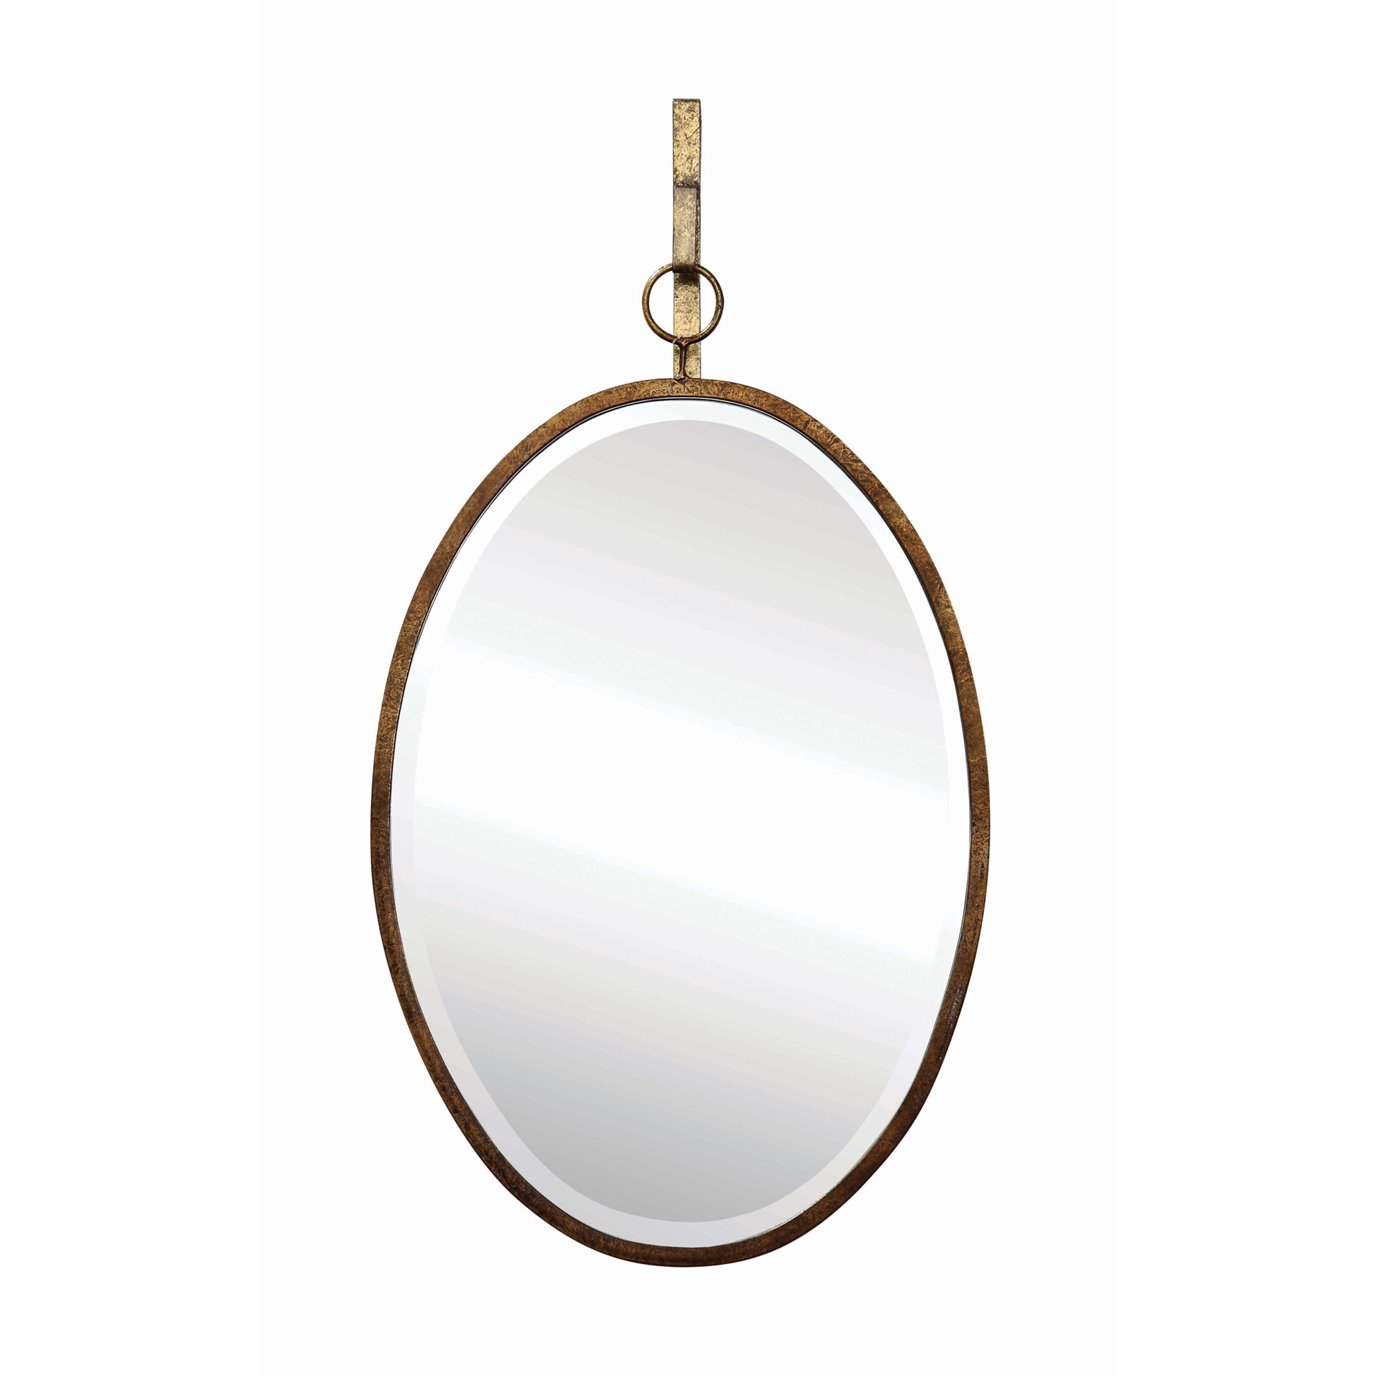 Oval Wall Mirror with Distressed Metal Frame & Hanging Bracket (Set of 2 Pieces)